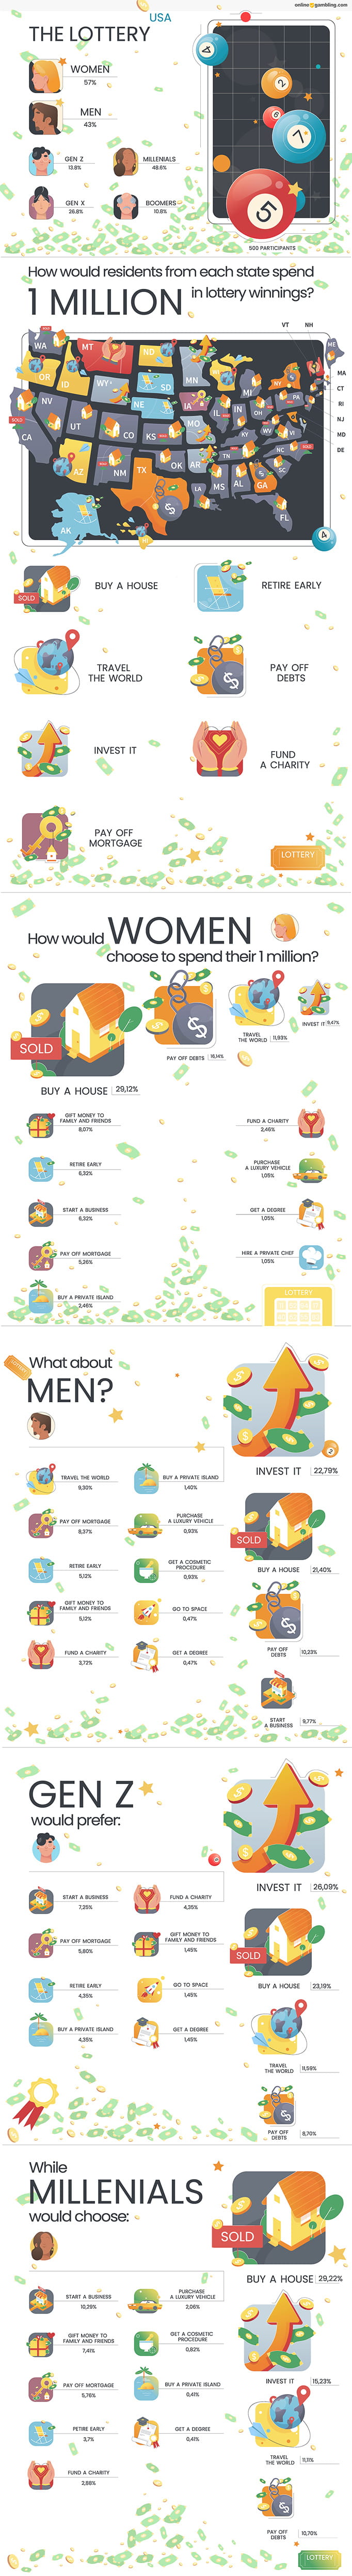 An infographic with different visuals and percentage data divided into states, generations and gender.